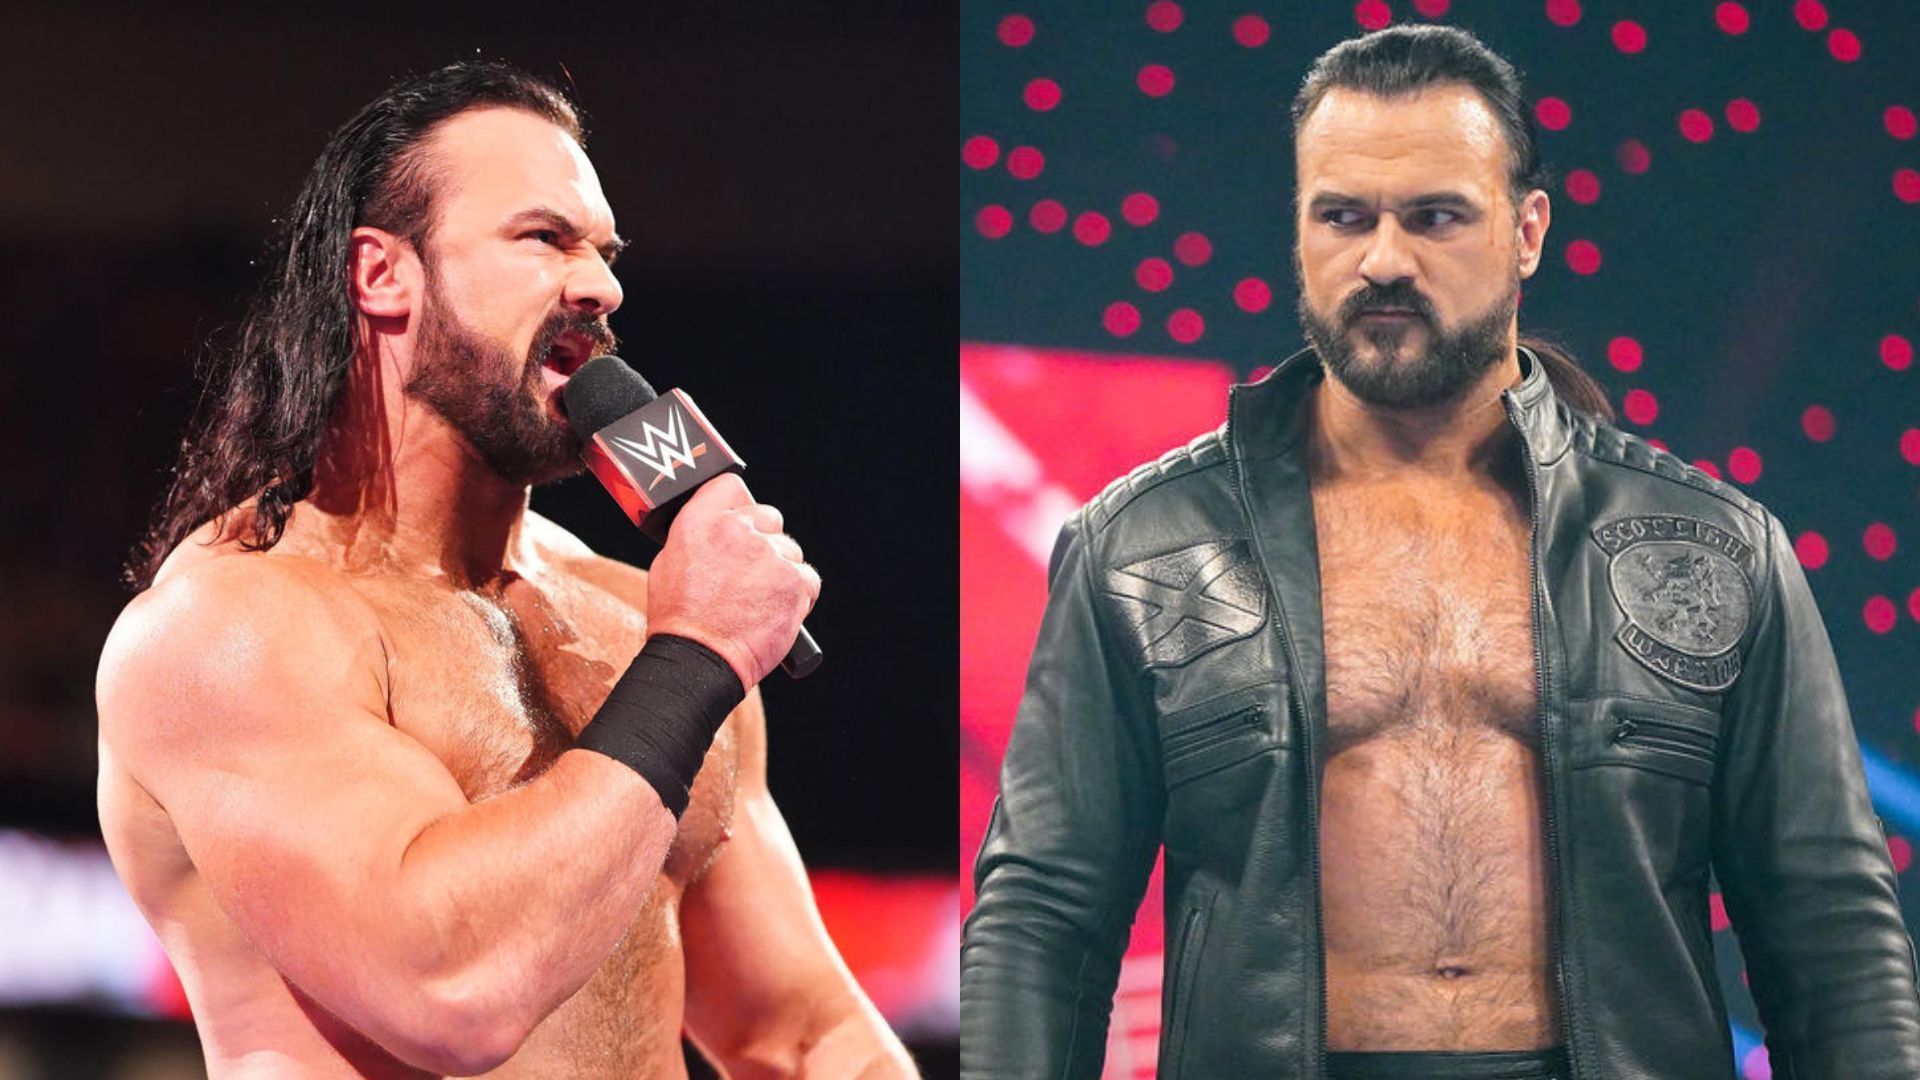 McIntyre is currently on the RAW brand.